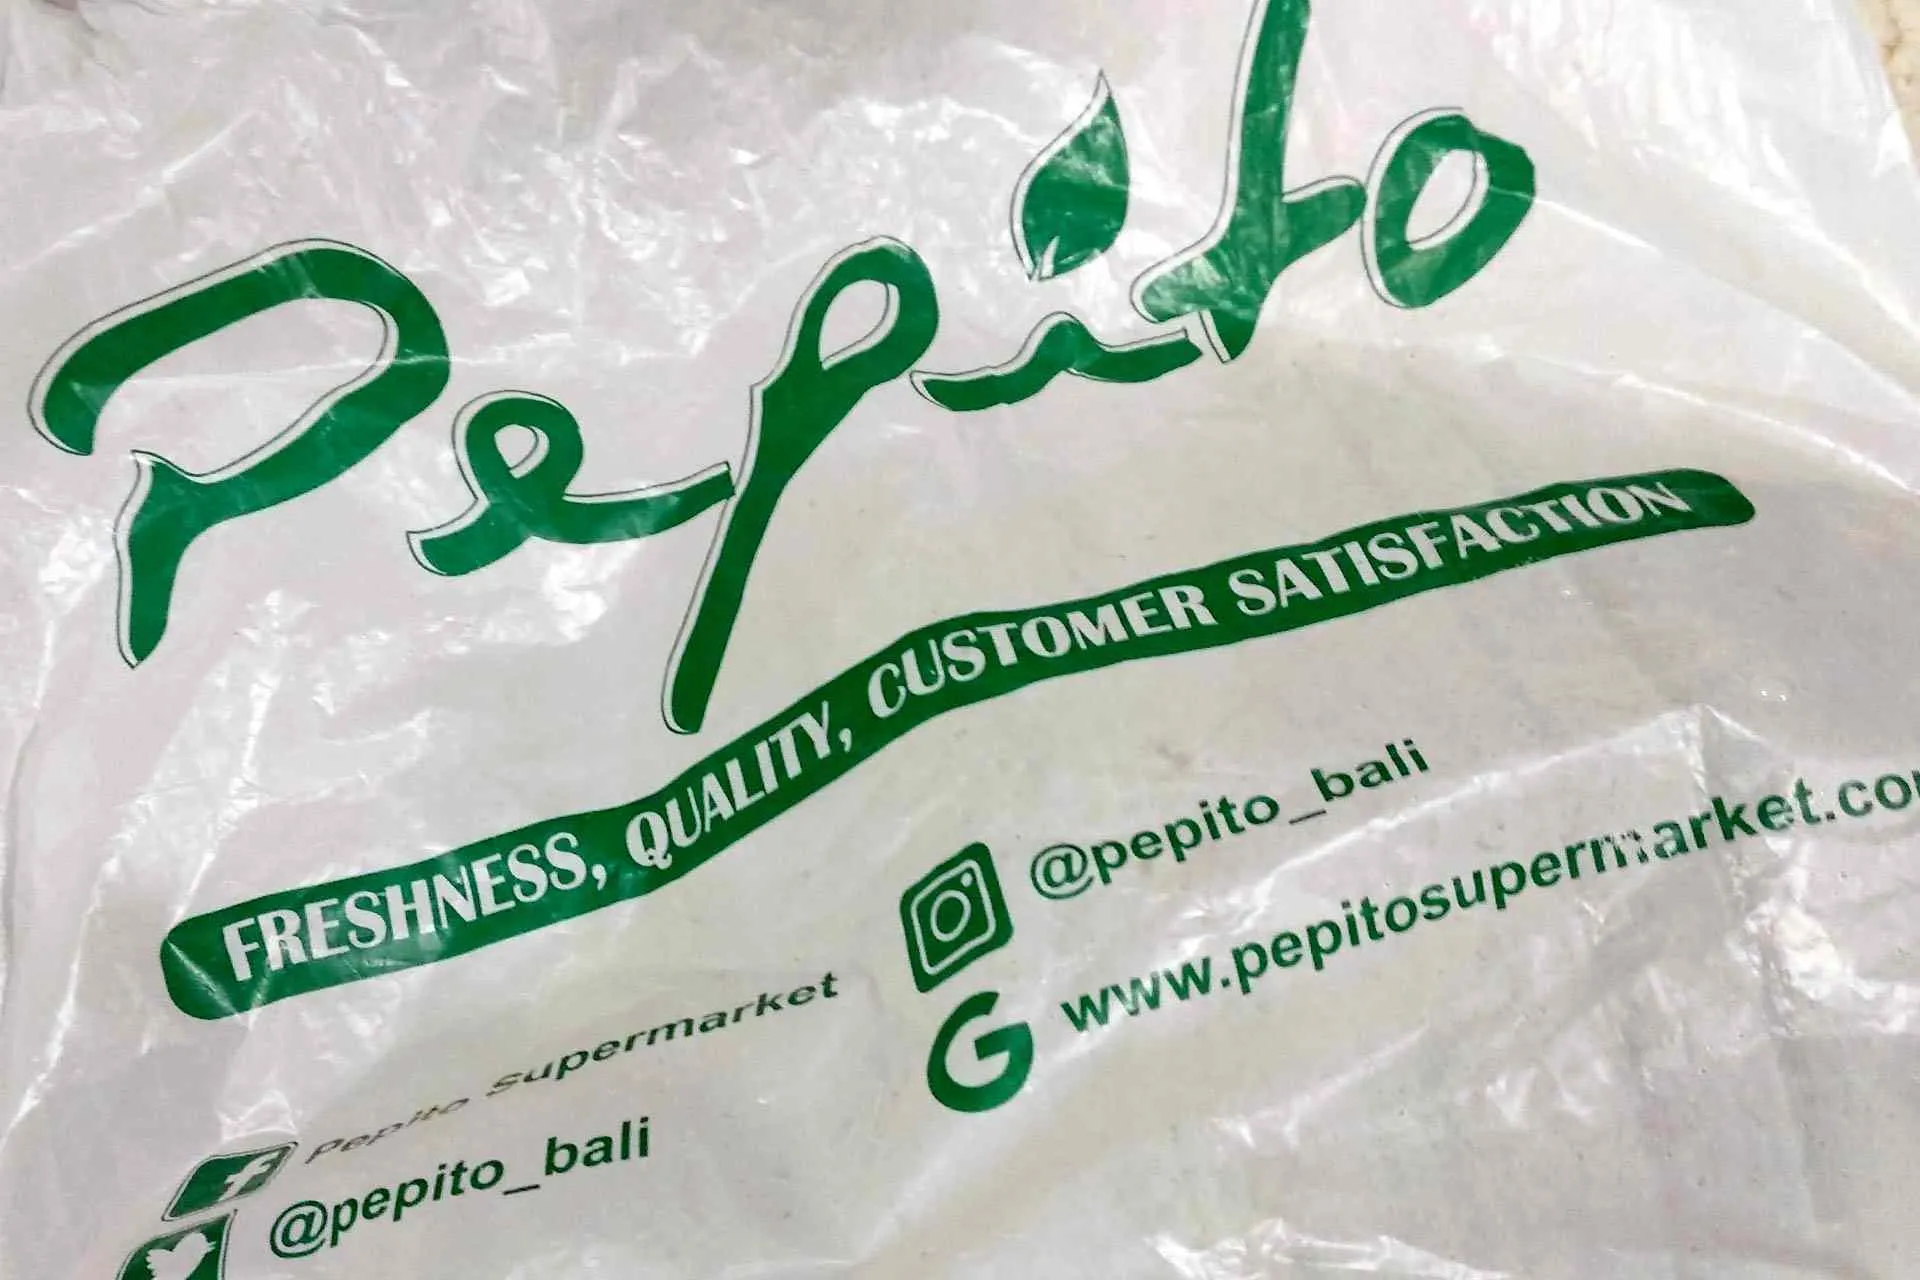 the Pepito/Popular supermarket chain has already adopted an 100% biodegradable plastic bag